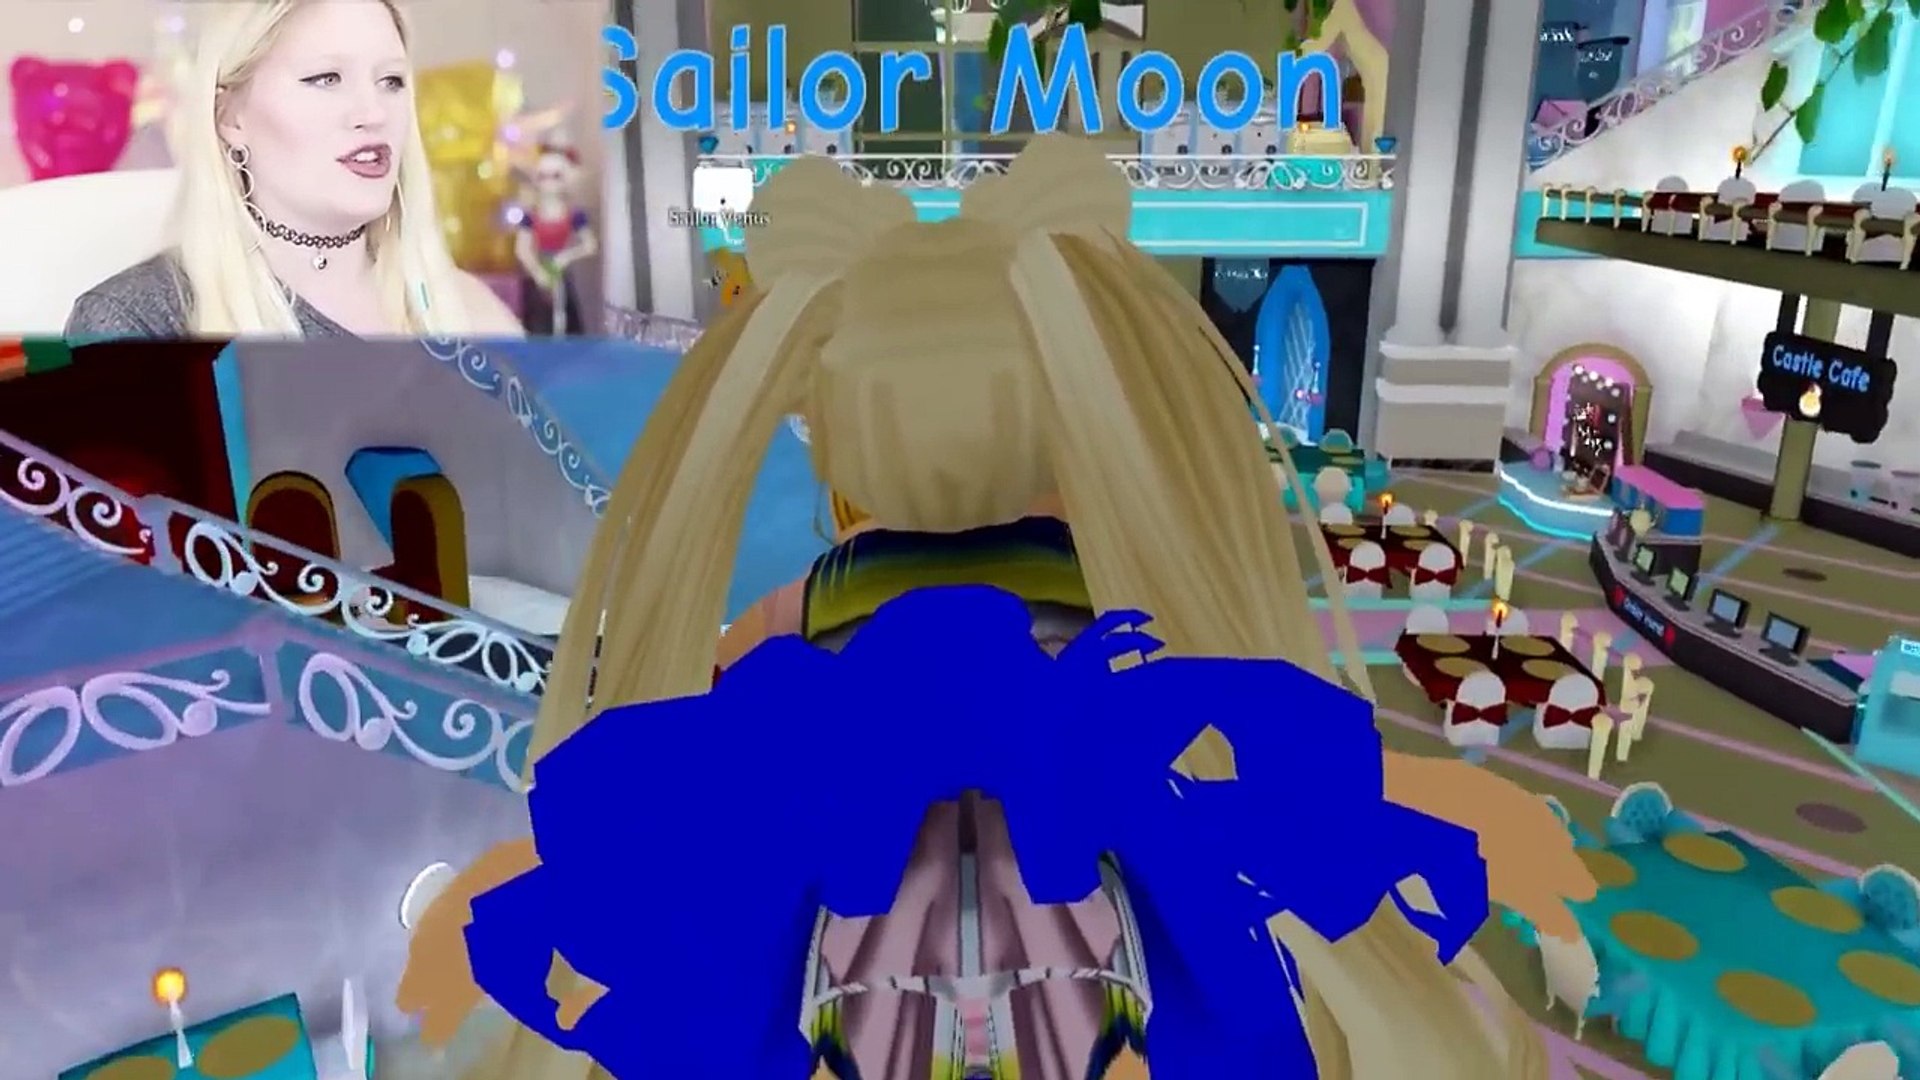 Sailor Moon The Sailor Scouts Ep 1 A Strange New World Roblox Royale High Dailymotion Video - turning boys outfits into girly outfits roblox royale high